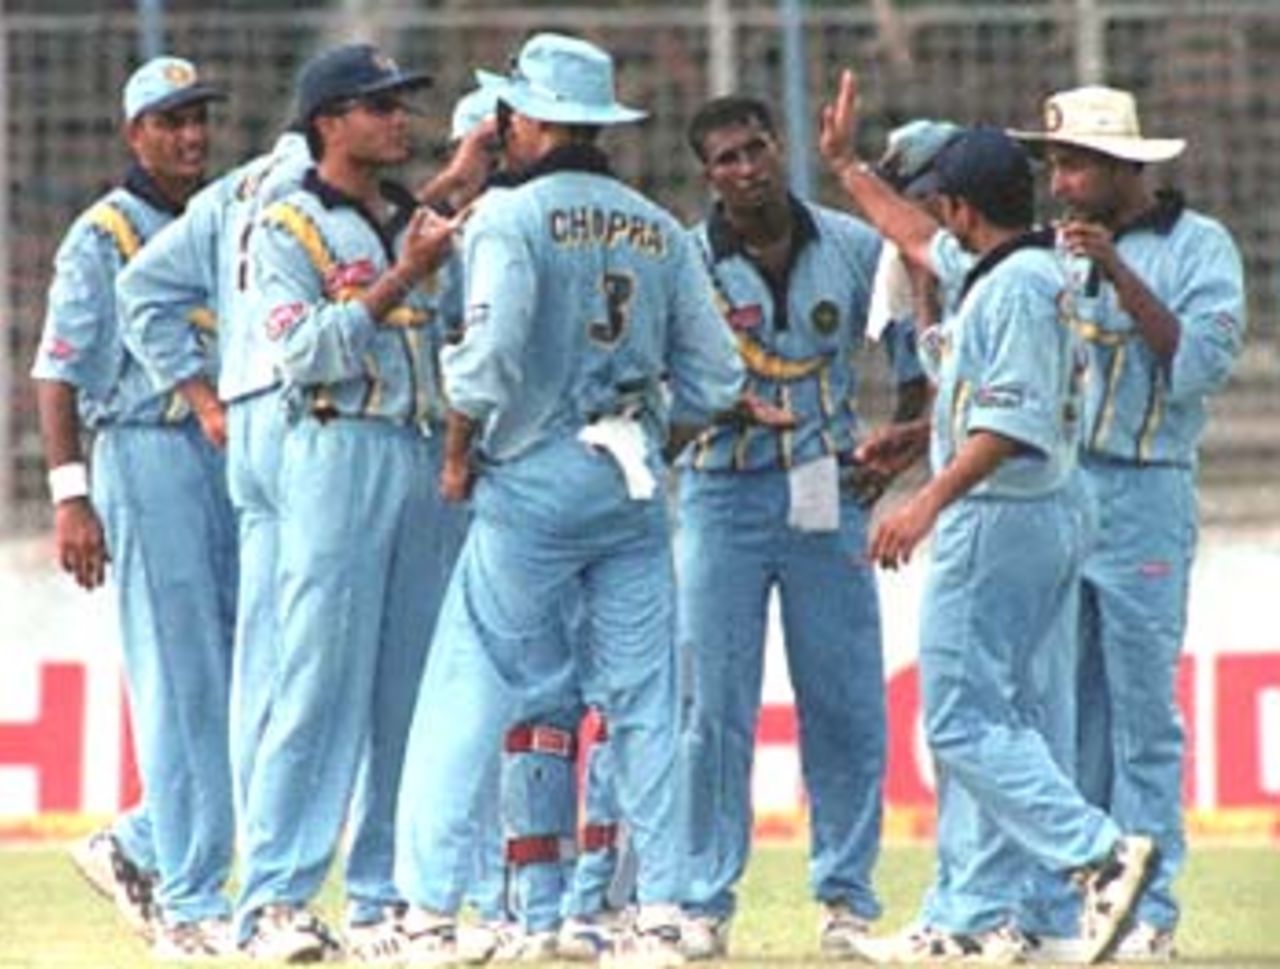 Indian players, including Sachin Tendulkar (2nd R), skipper Saurav Ganguly (2nd L) and former captain Mohammad Azharuddin (L), celebrate the fall of a Sri Lankan wicket during the four-nation Asia Cup limited-overs tournament at the Bangabandhu national stadium in Dhaka. India restricted Sri Lanka to 276-8. Asia Cup, 1999/00, 3rd Match, India v Sri Lanka, Bangabandhu National Stadium, Dhaka. 1 June 2000.